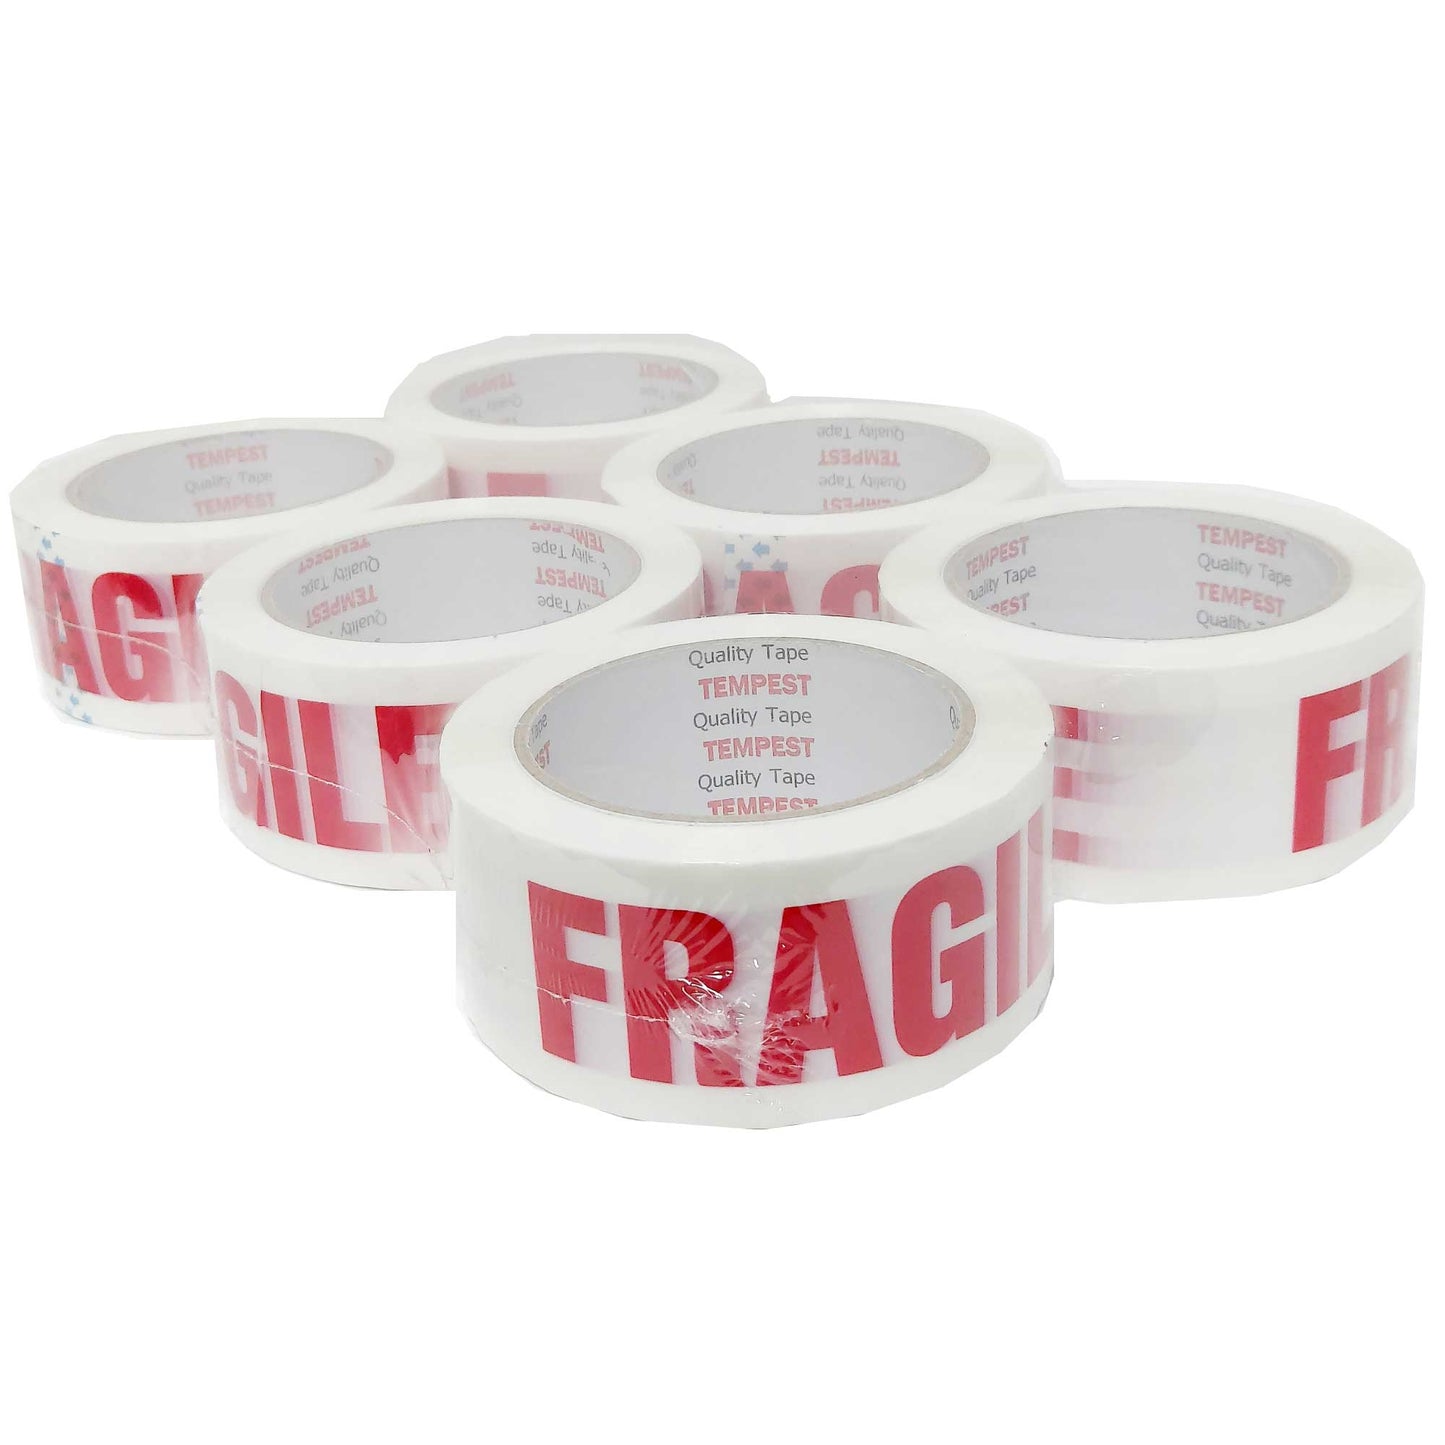 36x Fragile Packing Tape 48mmx75m Long Rolls Red White Packaging Adhesive Label